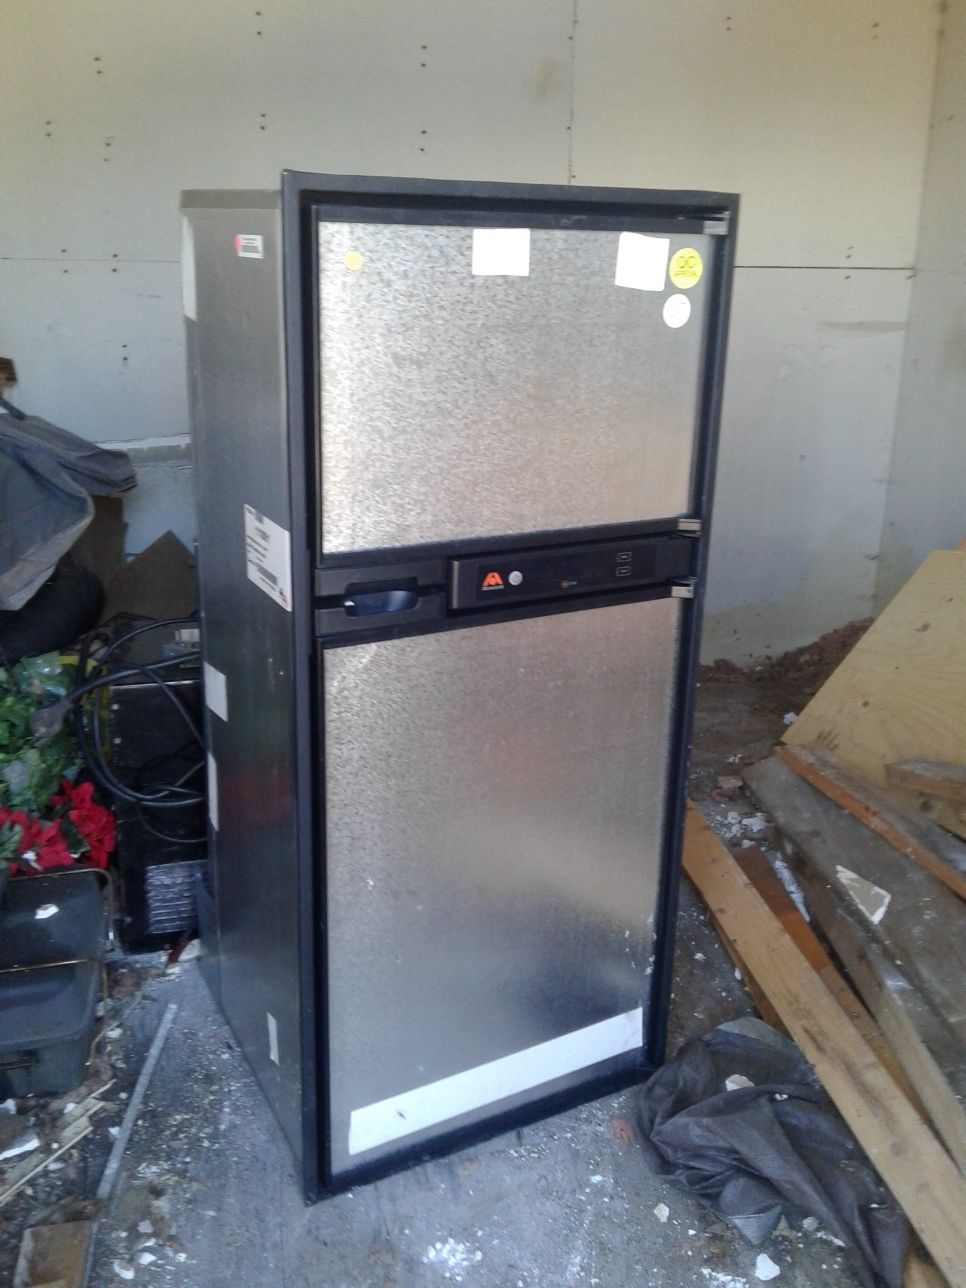 New fridge came out of a r.v